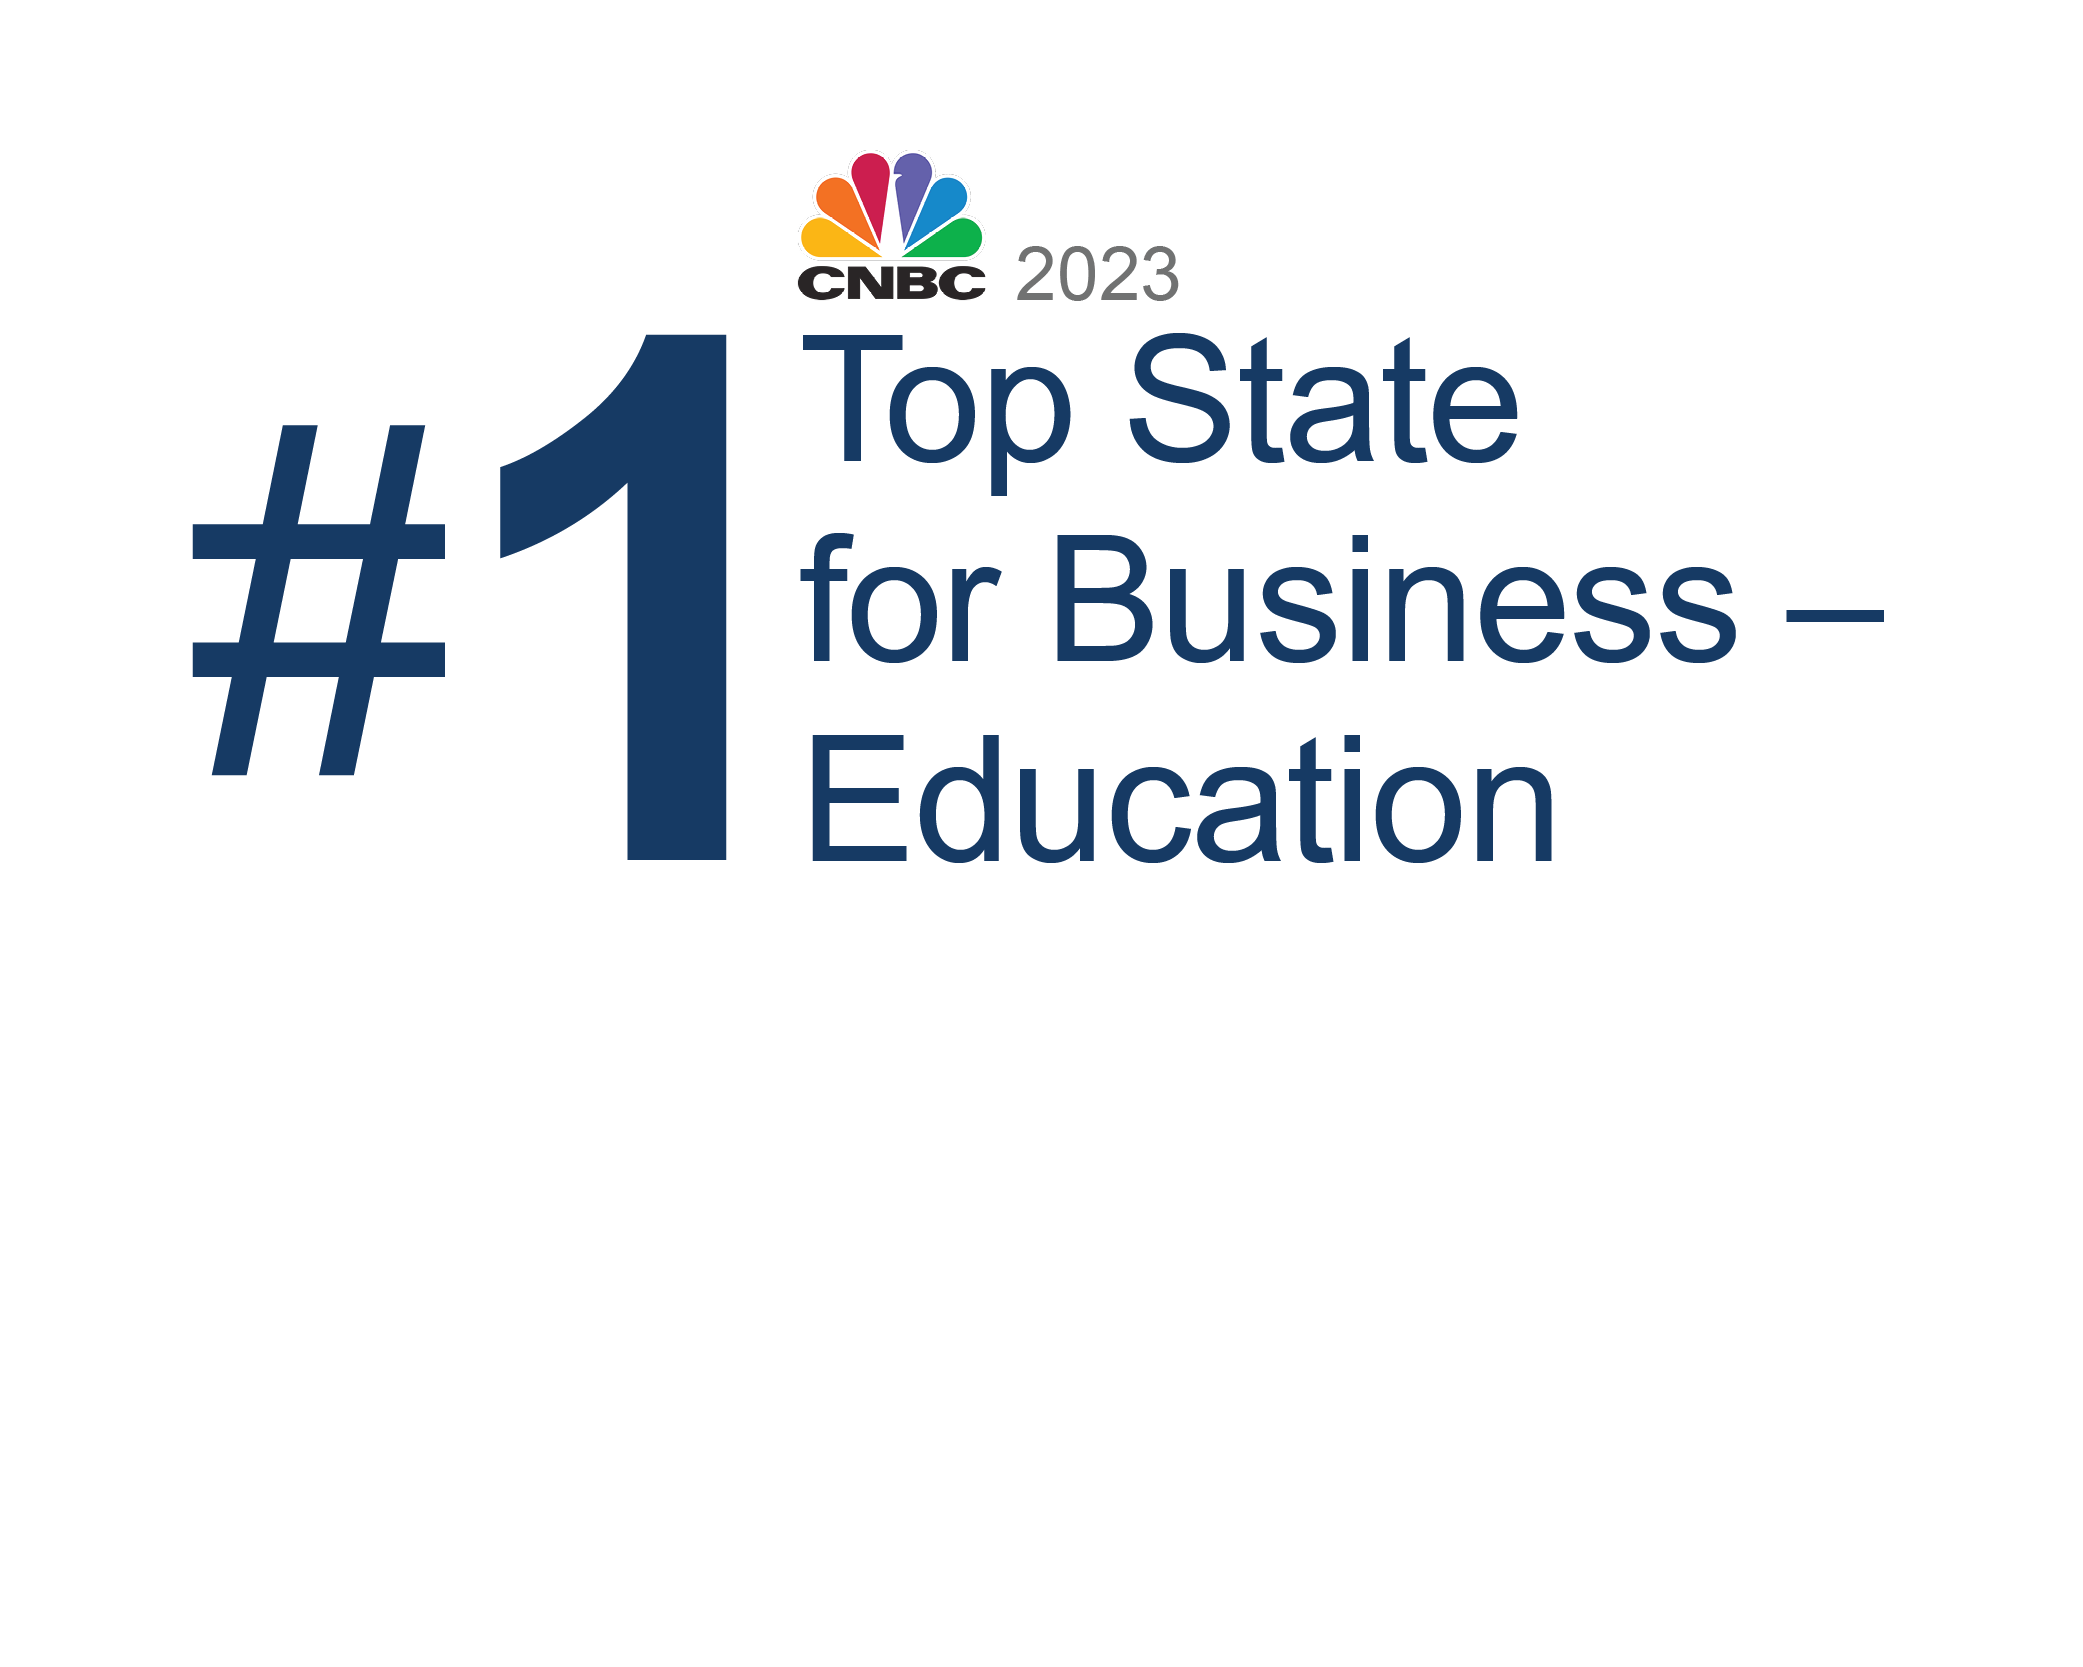 Virginia_CNBC_#1_Top State for Business - Education_2023